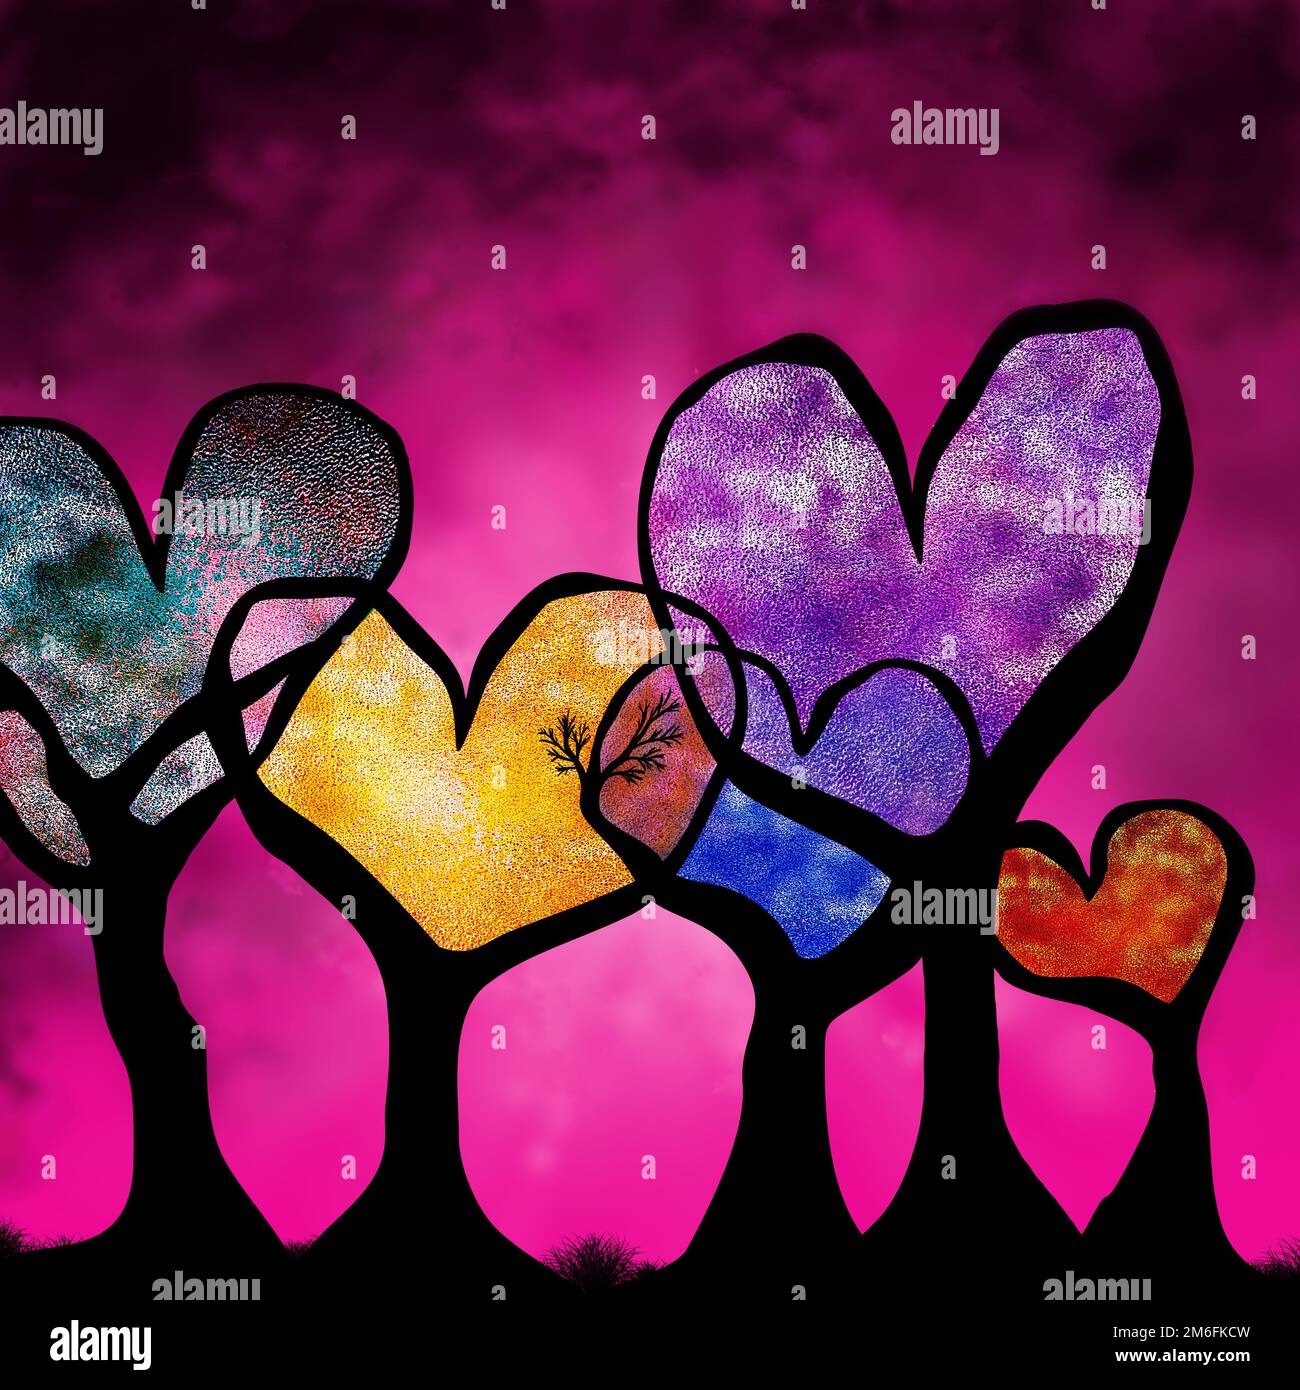 Illustration of Valentine's Day theme with frosted glass Trees of Love Stock Photo